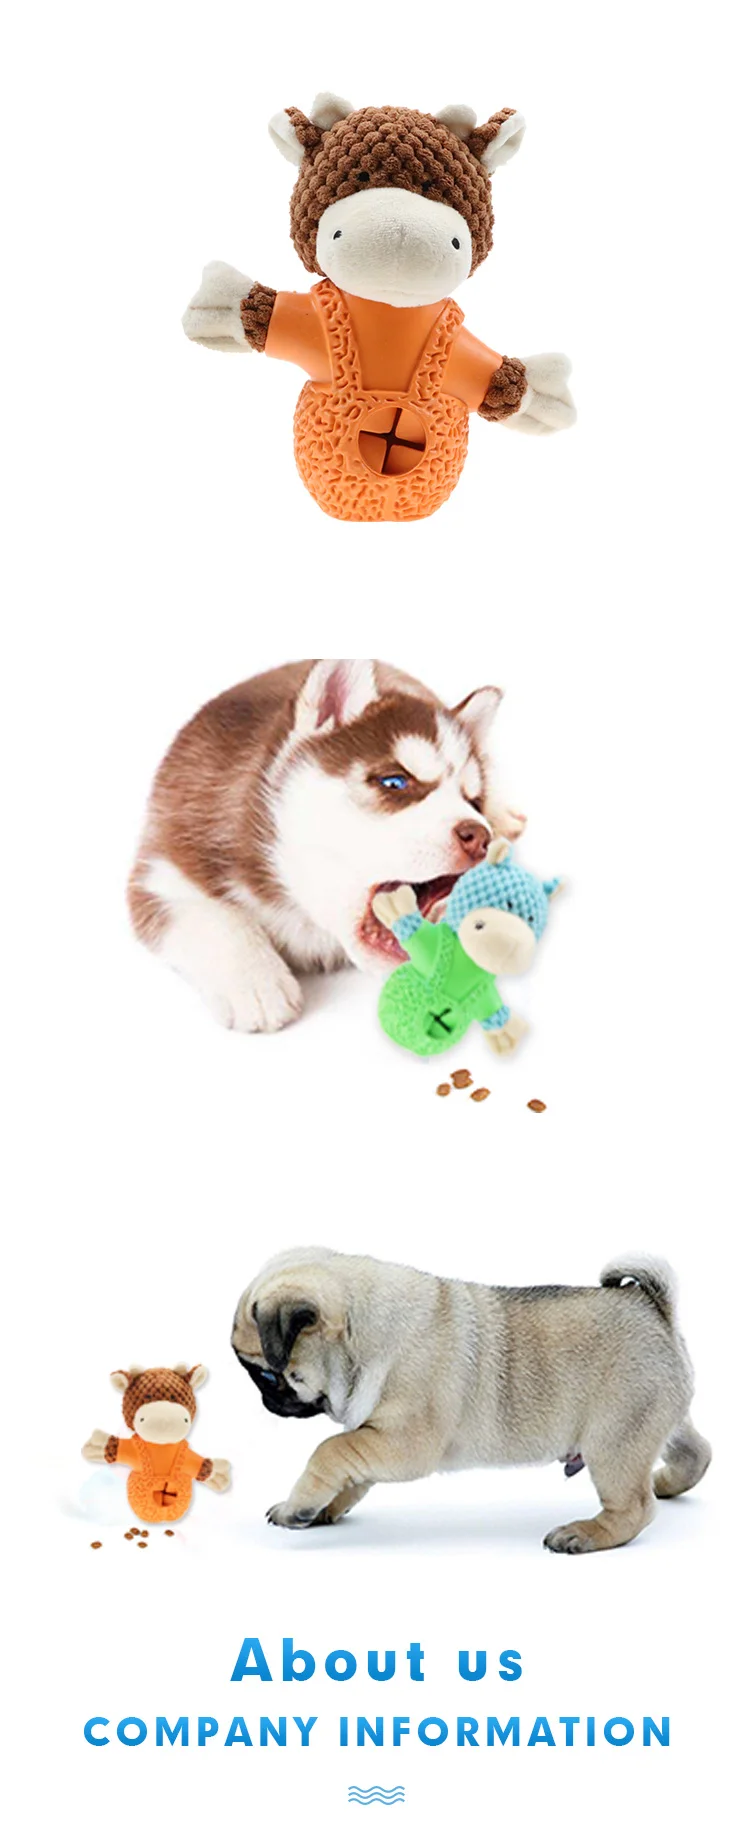 Non-toxic durable corduroy toys Rabbit chews and puppies play Recommendation of Puppy